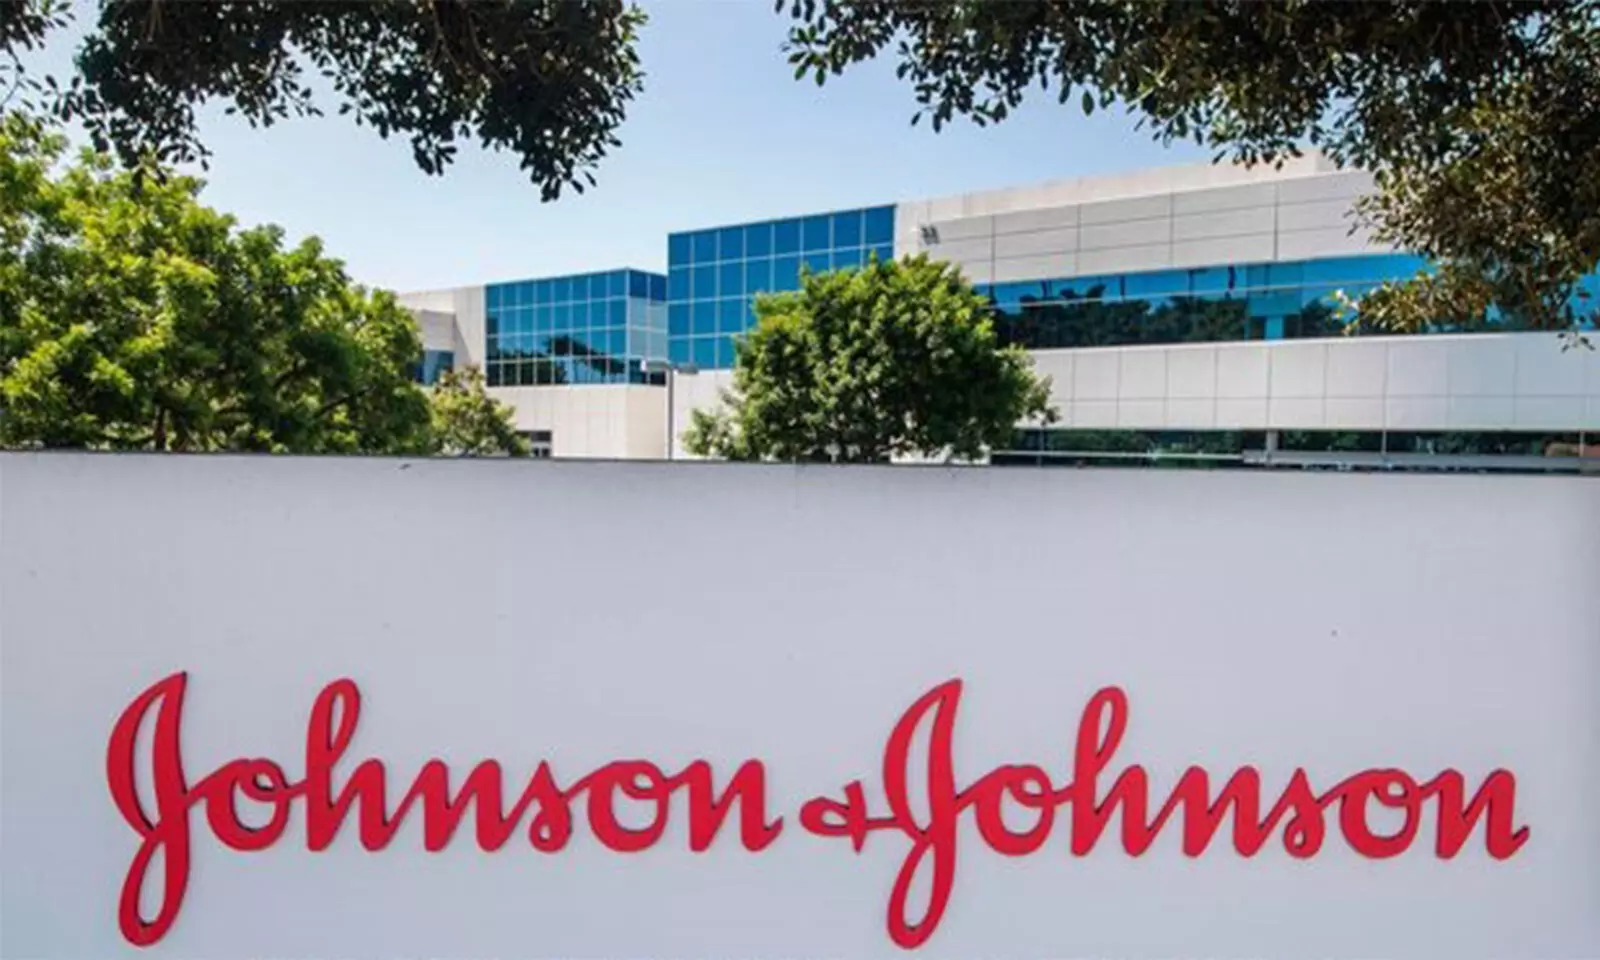 JnJ plans to seek USFDA authorization for booster shot of Covid-19 vaccine